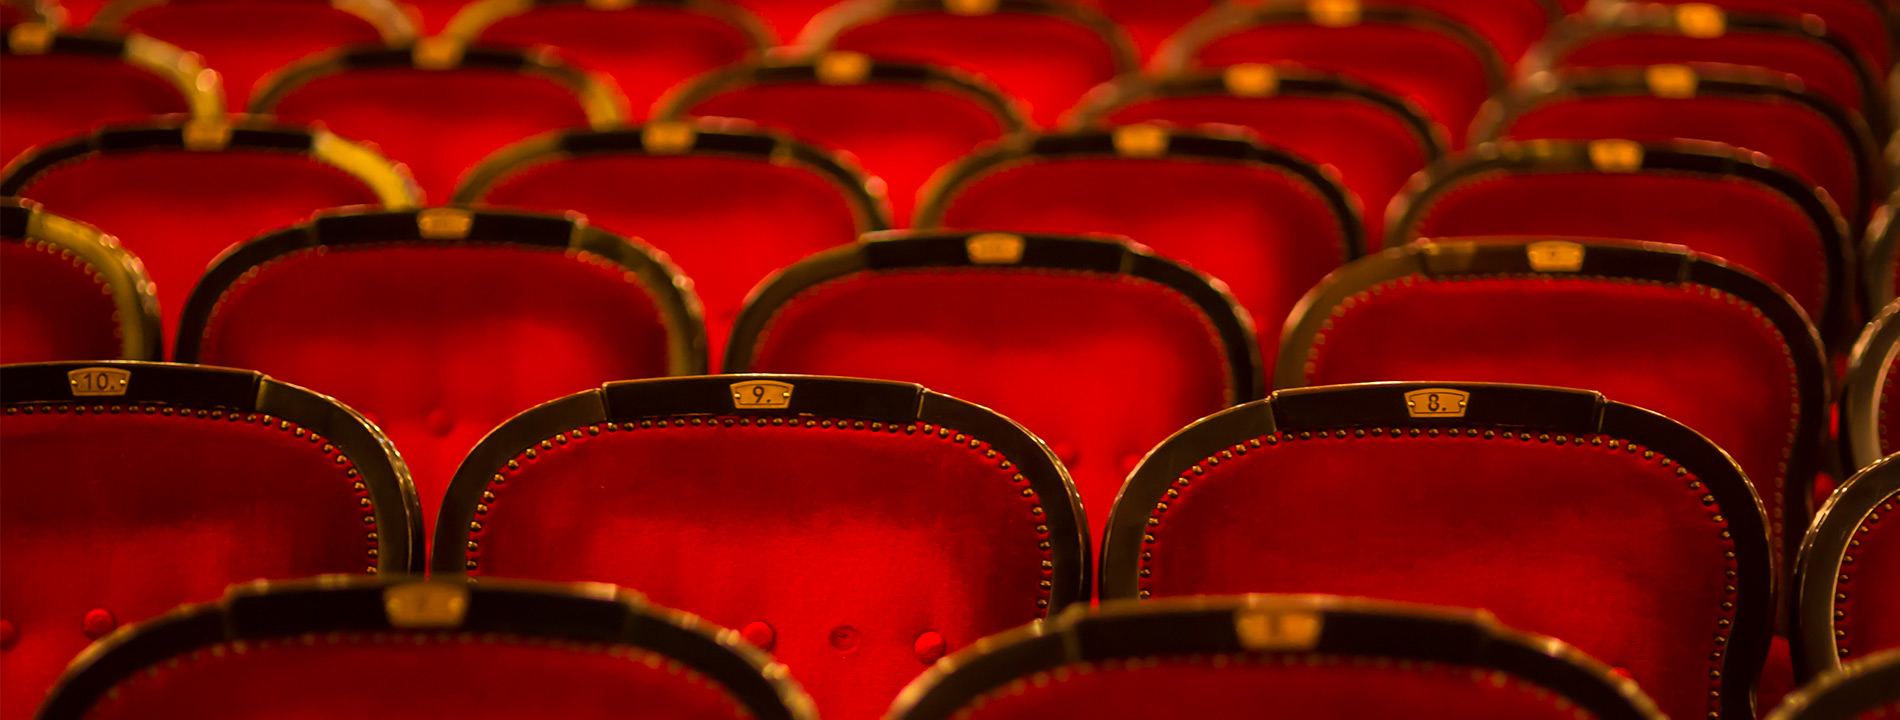 Red chairs in a theater.